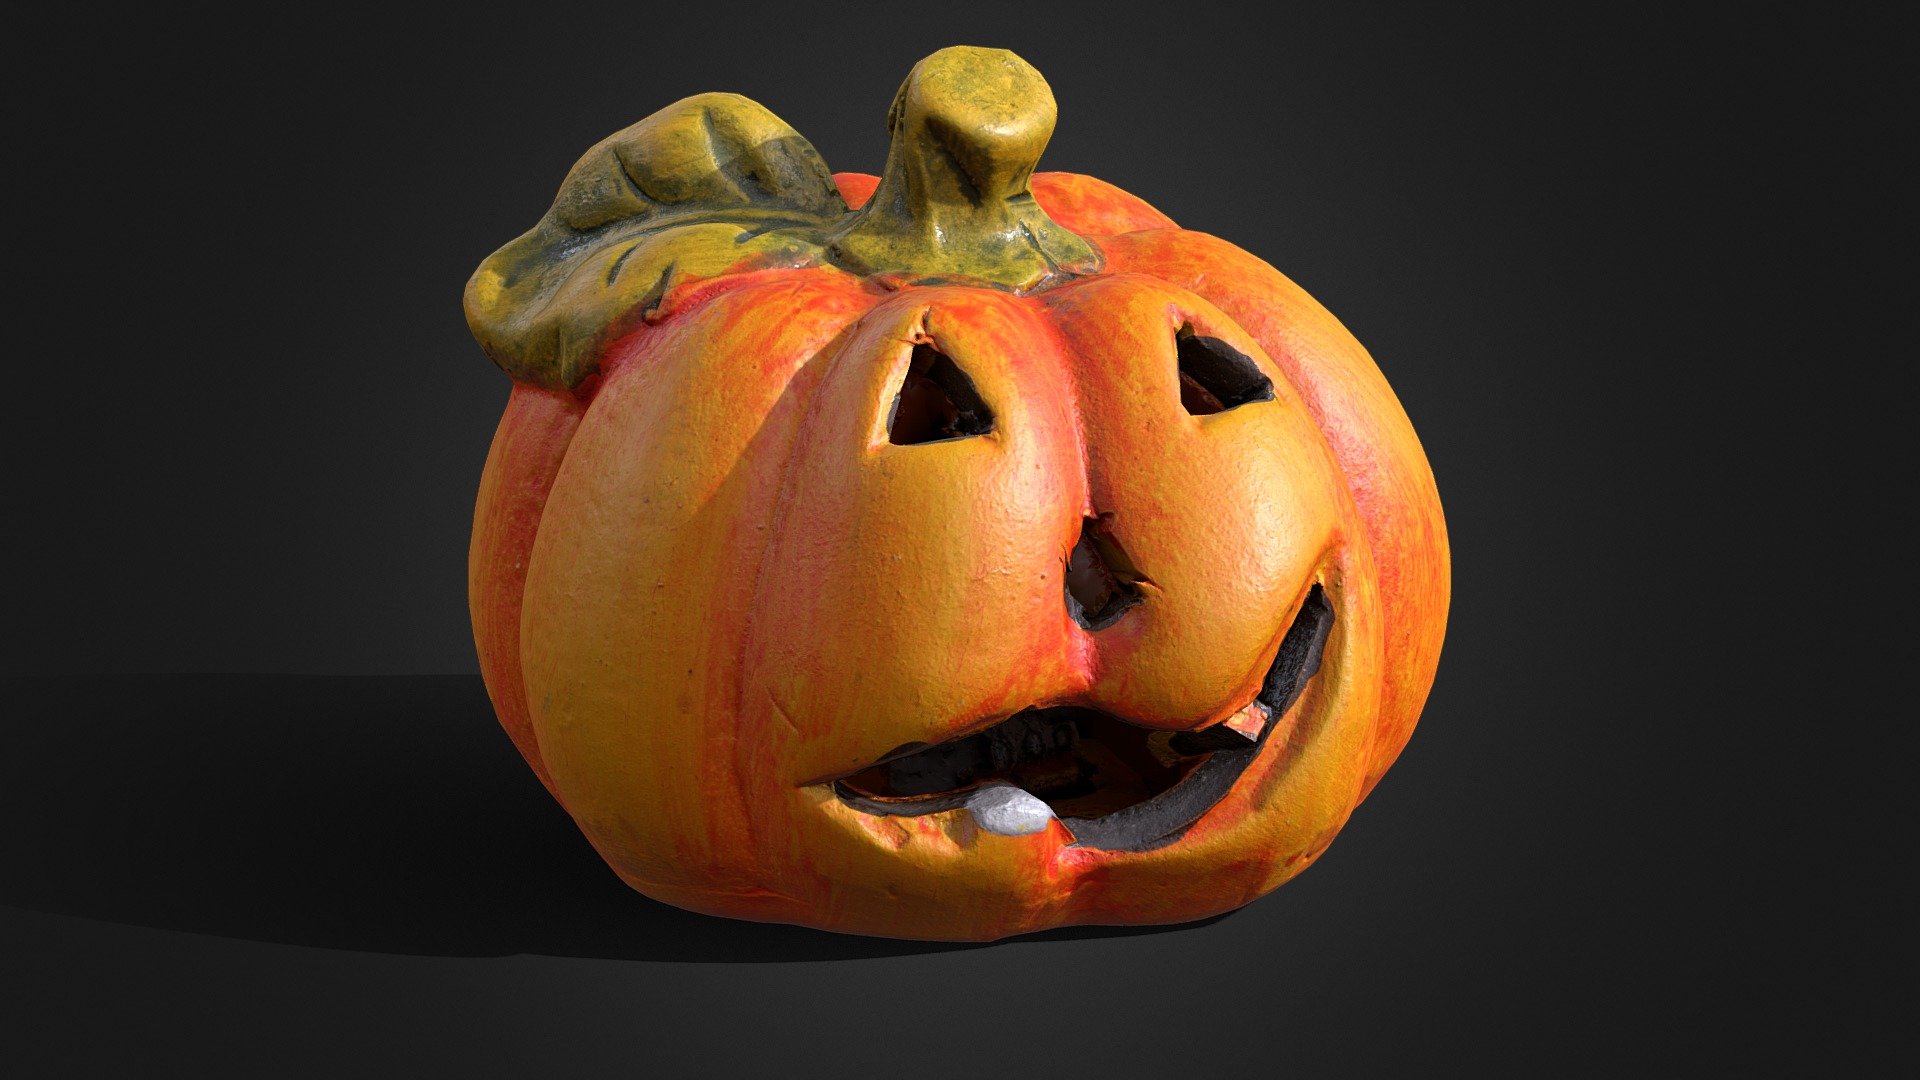 3D scan by photogrammetry

8k Albedo + 8k Occlusion + 8k Normals (.tiff format in additional file)

Preview is 4k .jpg - Ceramic Halloween Pumpkin - Buy Royalty Free 3D model by Andrea Spognetta (Spogna) (@spogna) 3d model